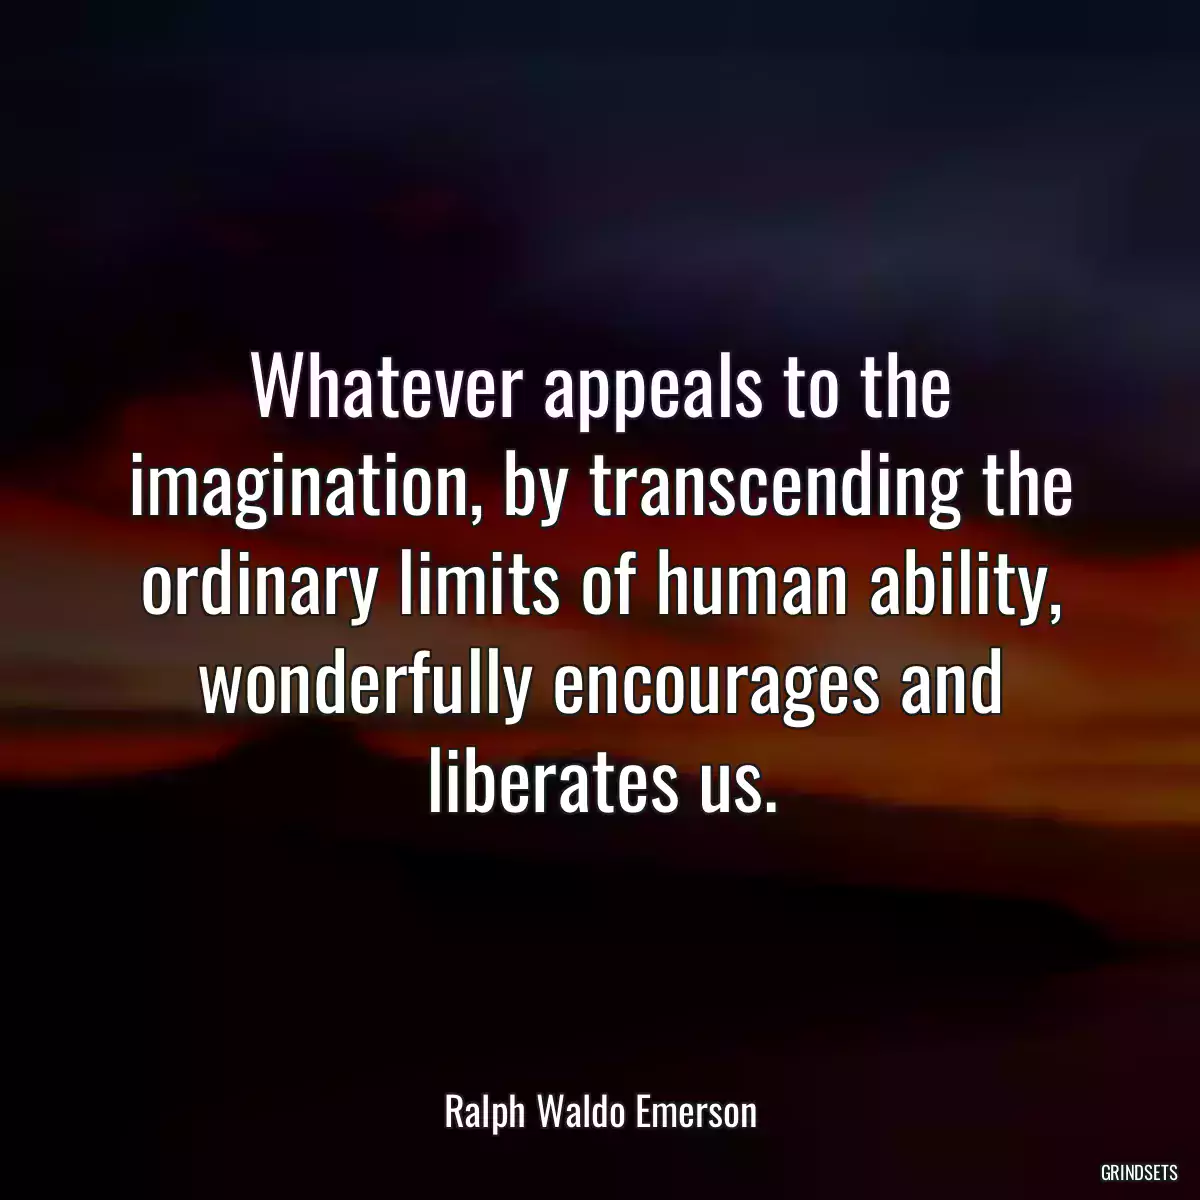 Whatever appeals to the imagination, by transcending the ordinary limits of human ability, wonderfully encourages and liberates us.